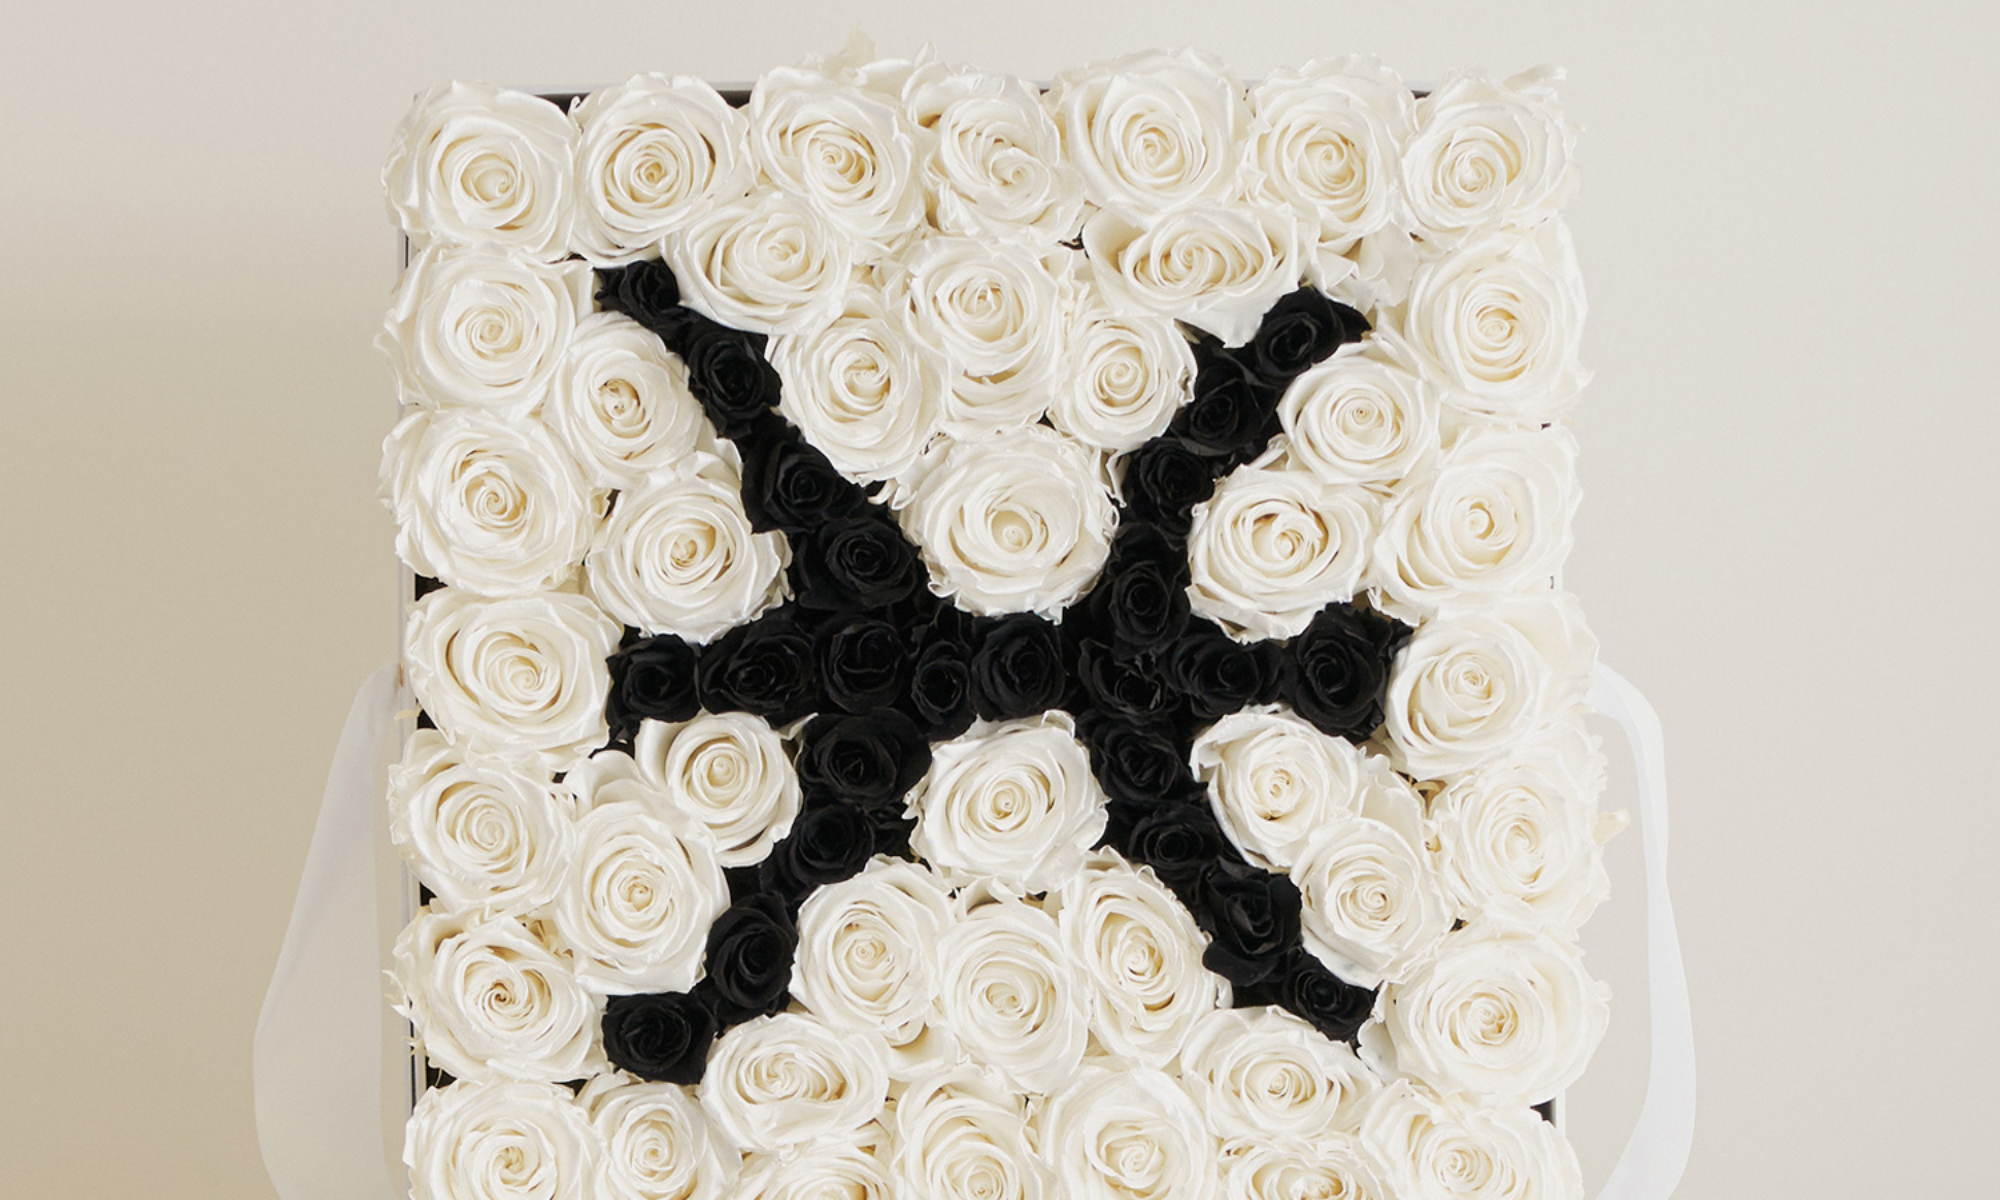 The Aries Zodiac Flower Symbol in Luxurious Roses